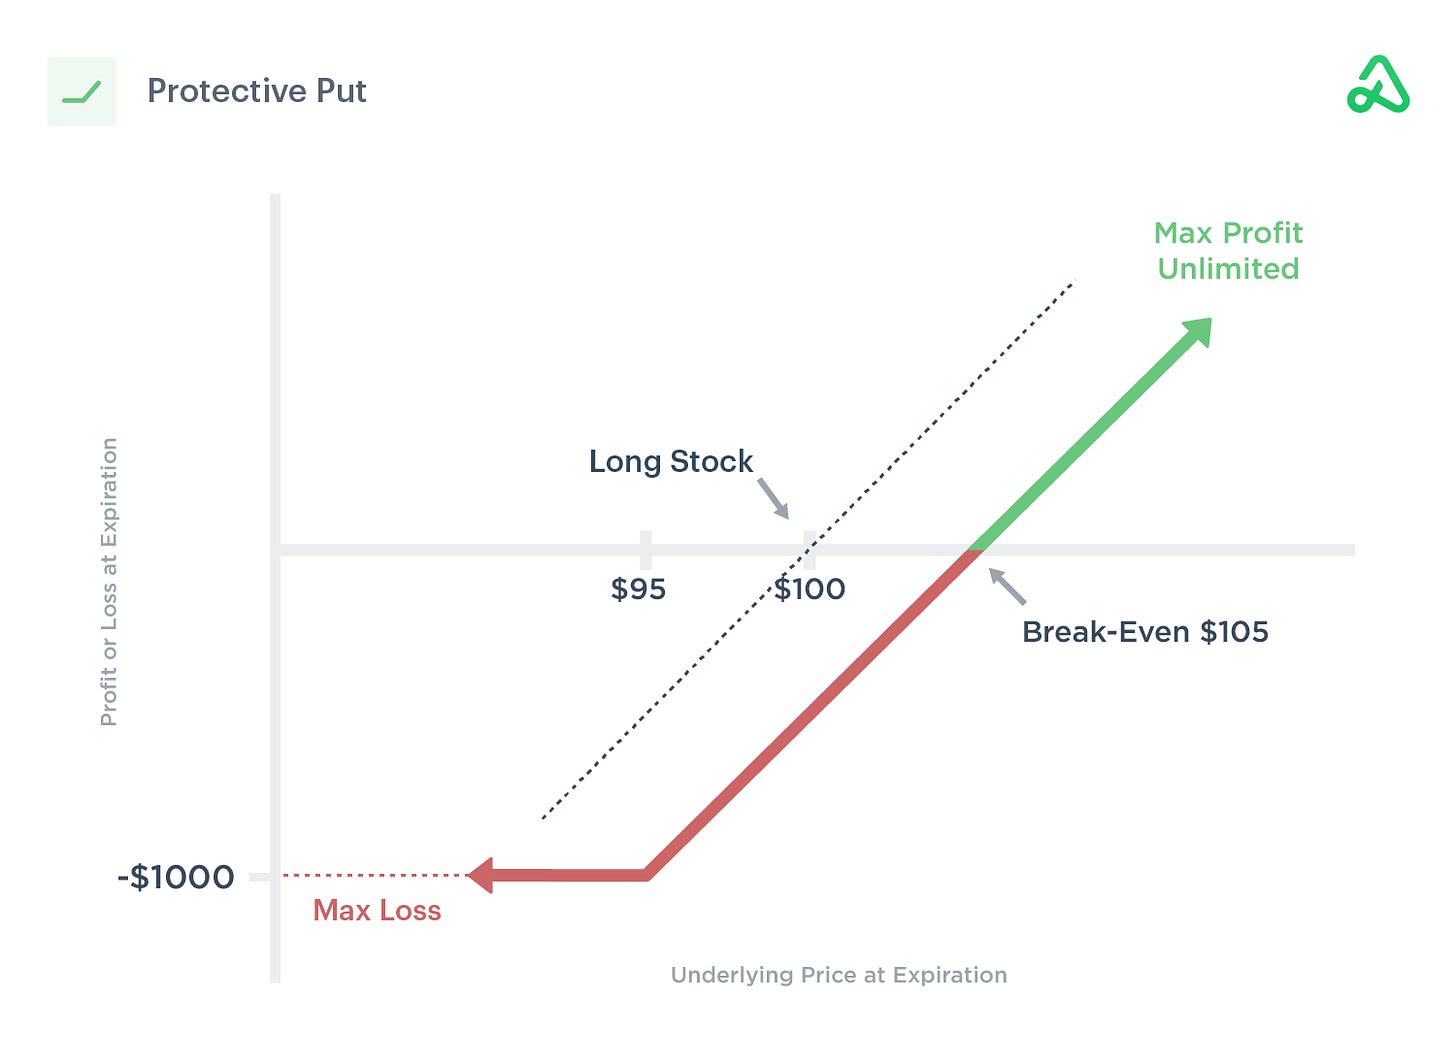 Image of a protective put payoff diagram showing max profit, max loss, and break-even points